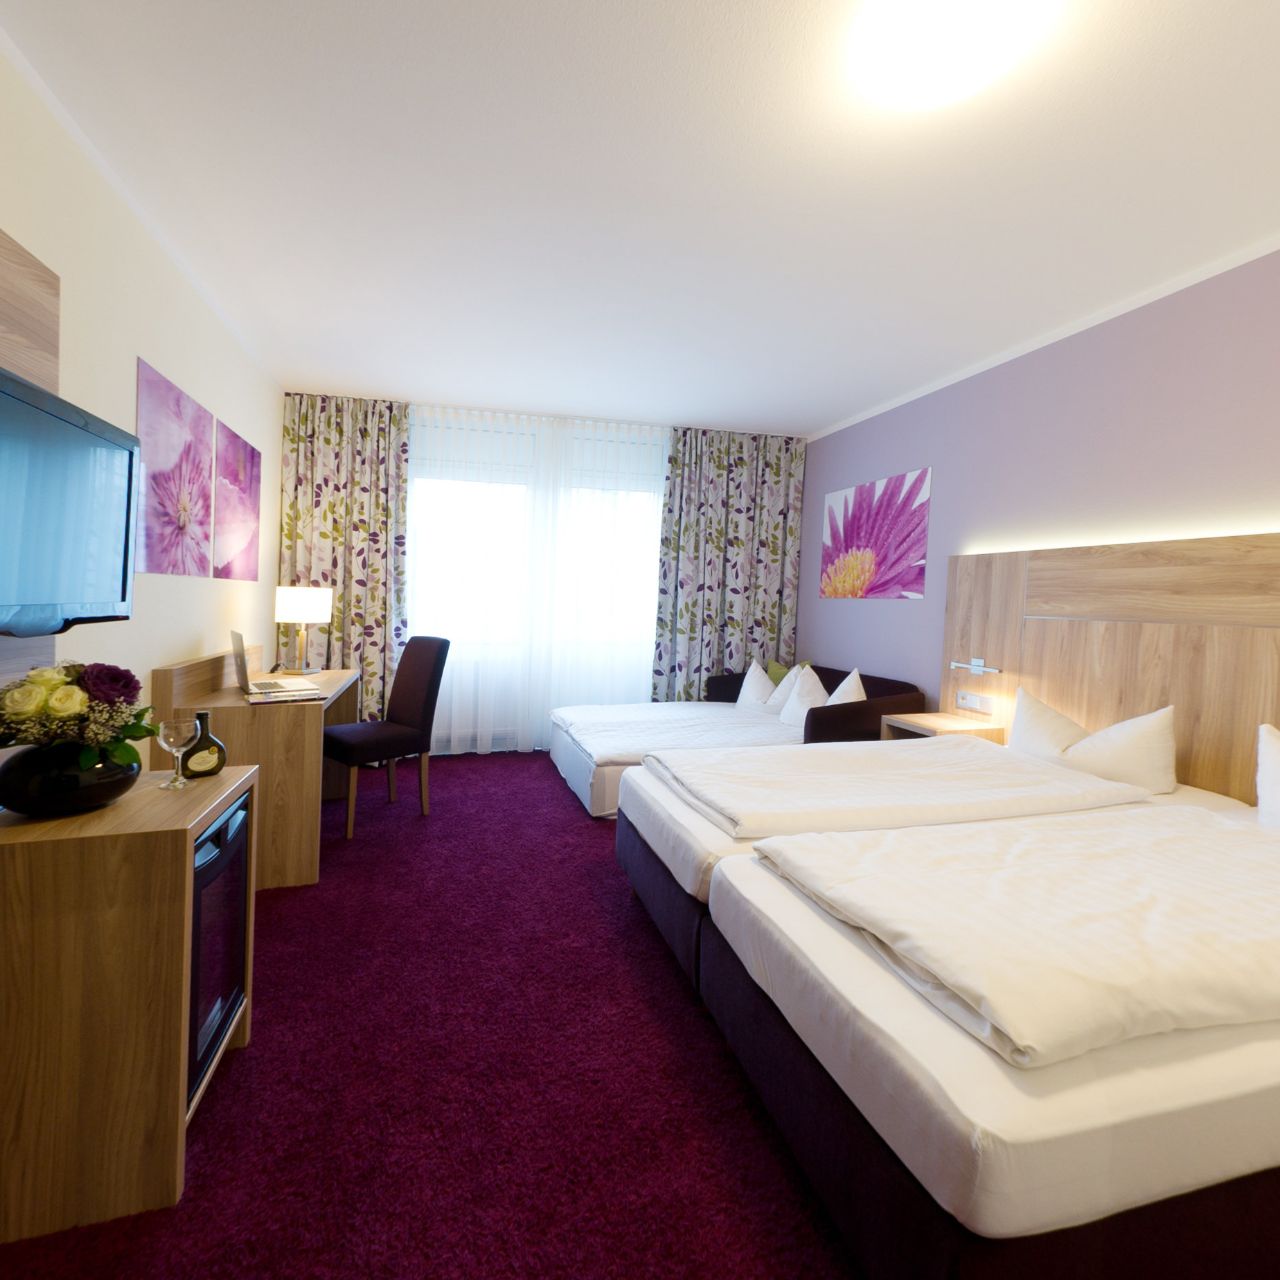 Hotel Aigner - Ottobrunn - Great prices at HOTEL INFO